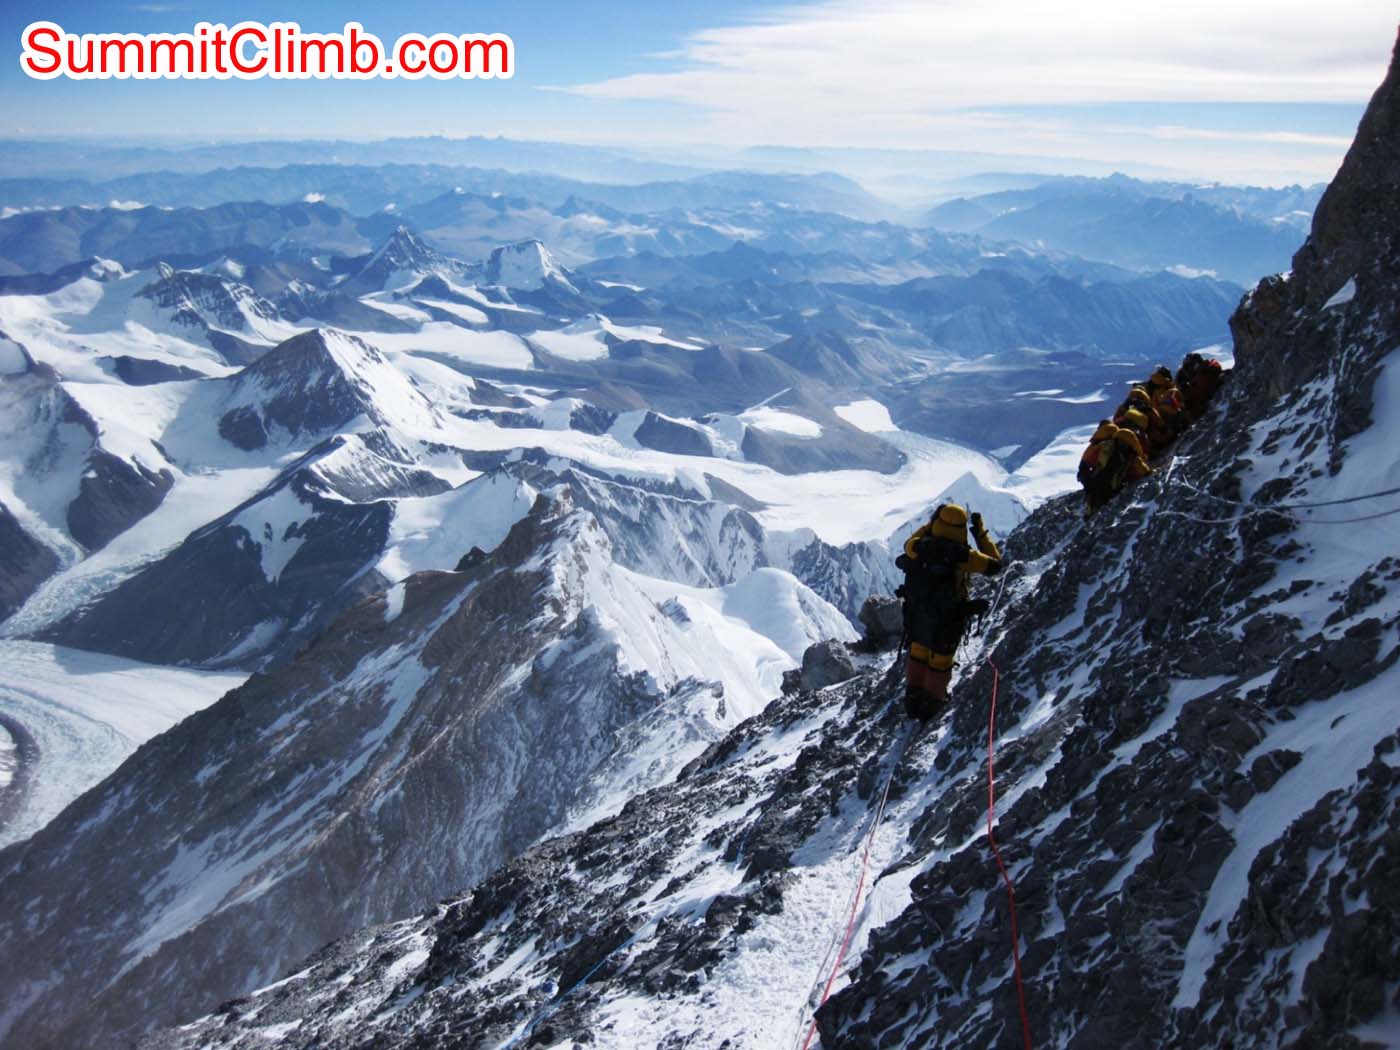 Climber descending Everest between 3rd step and 2nd step - photo Mia Graeffe